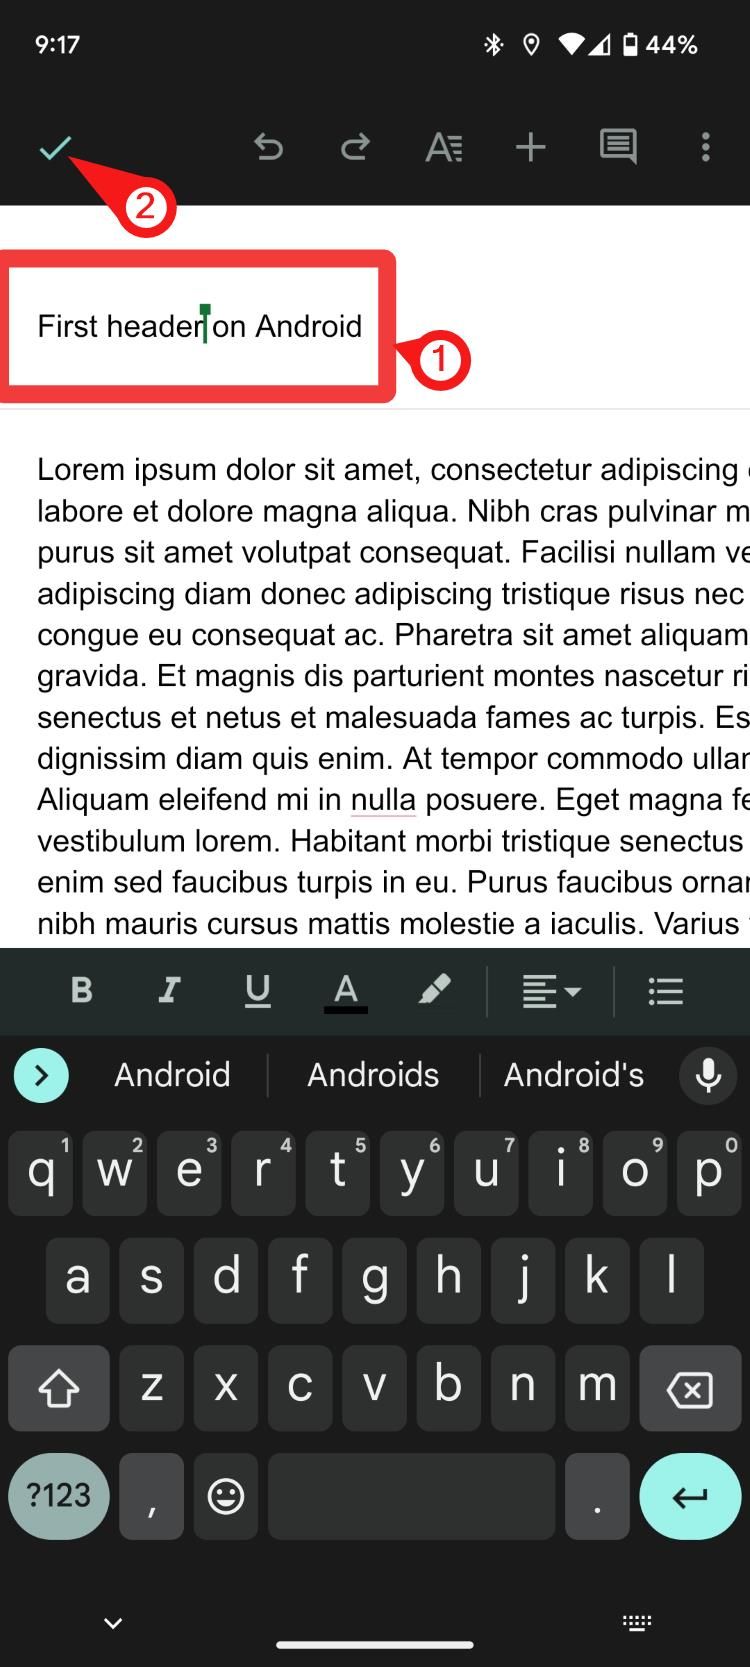 Google-docs-app-first-header-on-android